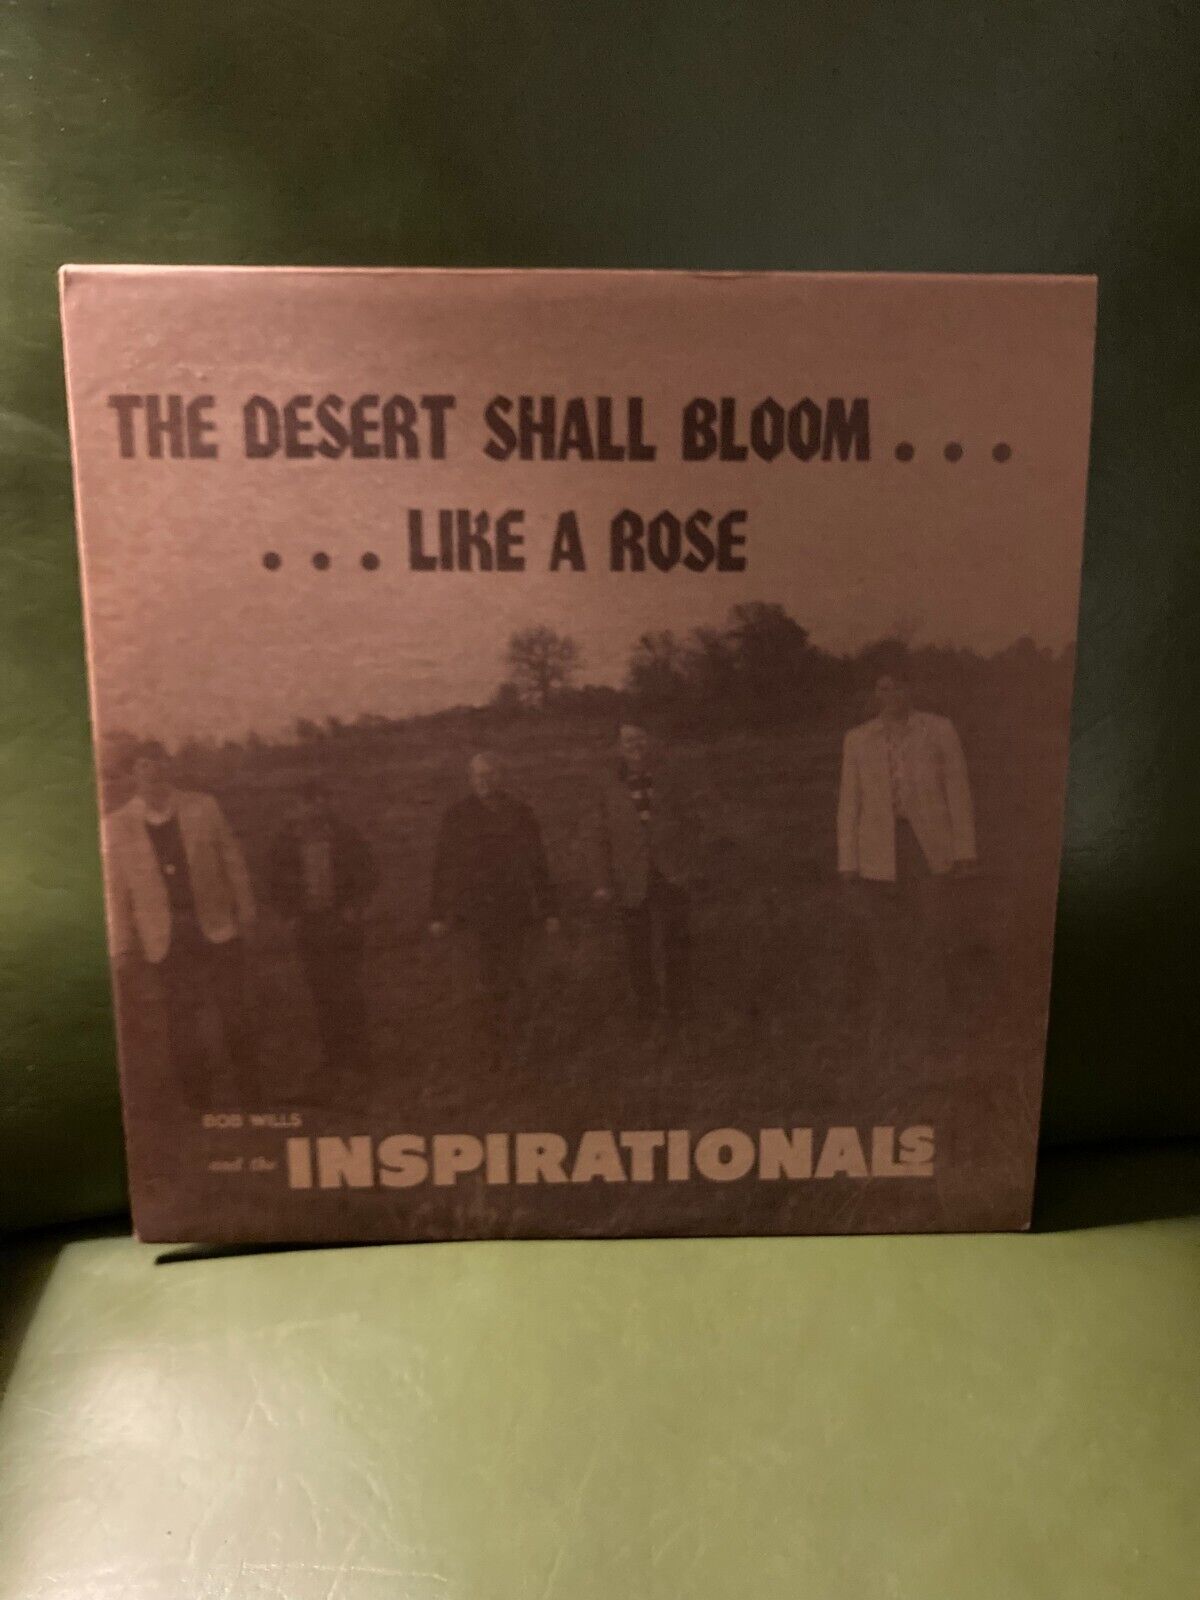 Bob Wills And The Inspirationals – The Desert Shall Bloom Like A Rose LP Vinyl